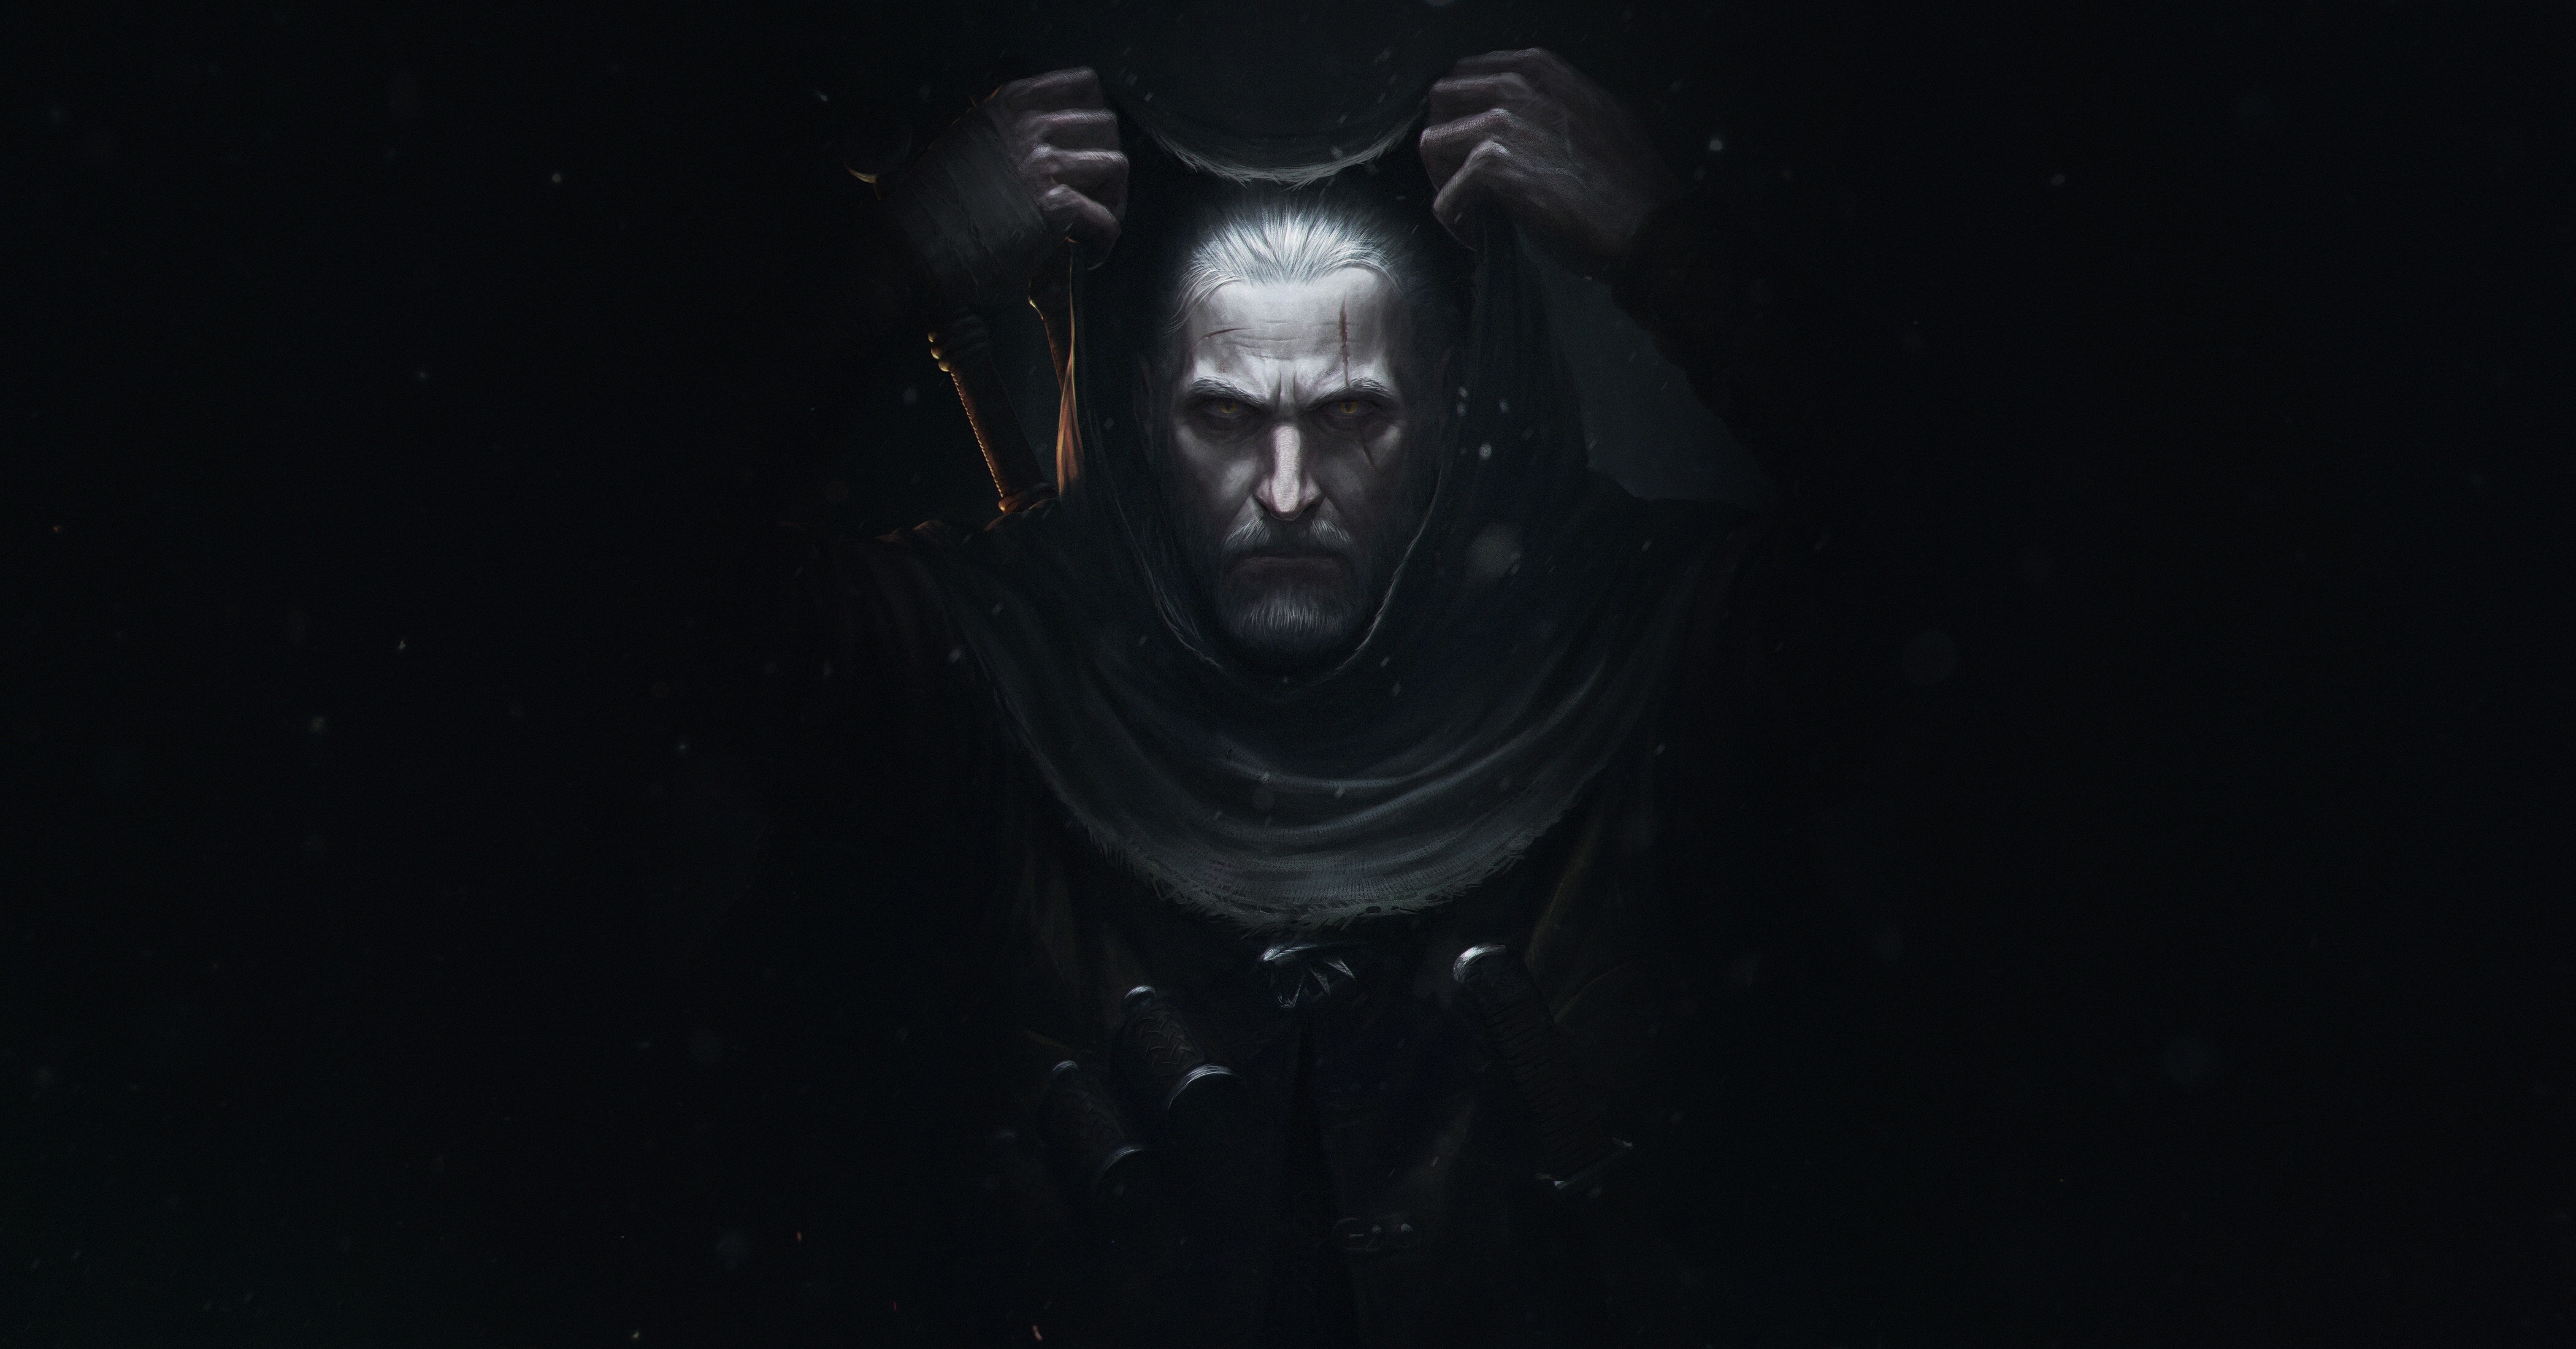 The Witcher 3 Wild Hunt Poster Wallpaper Hd Games 4k Wallpapers Images Photos And Background